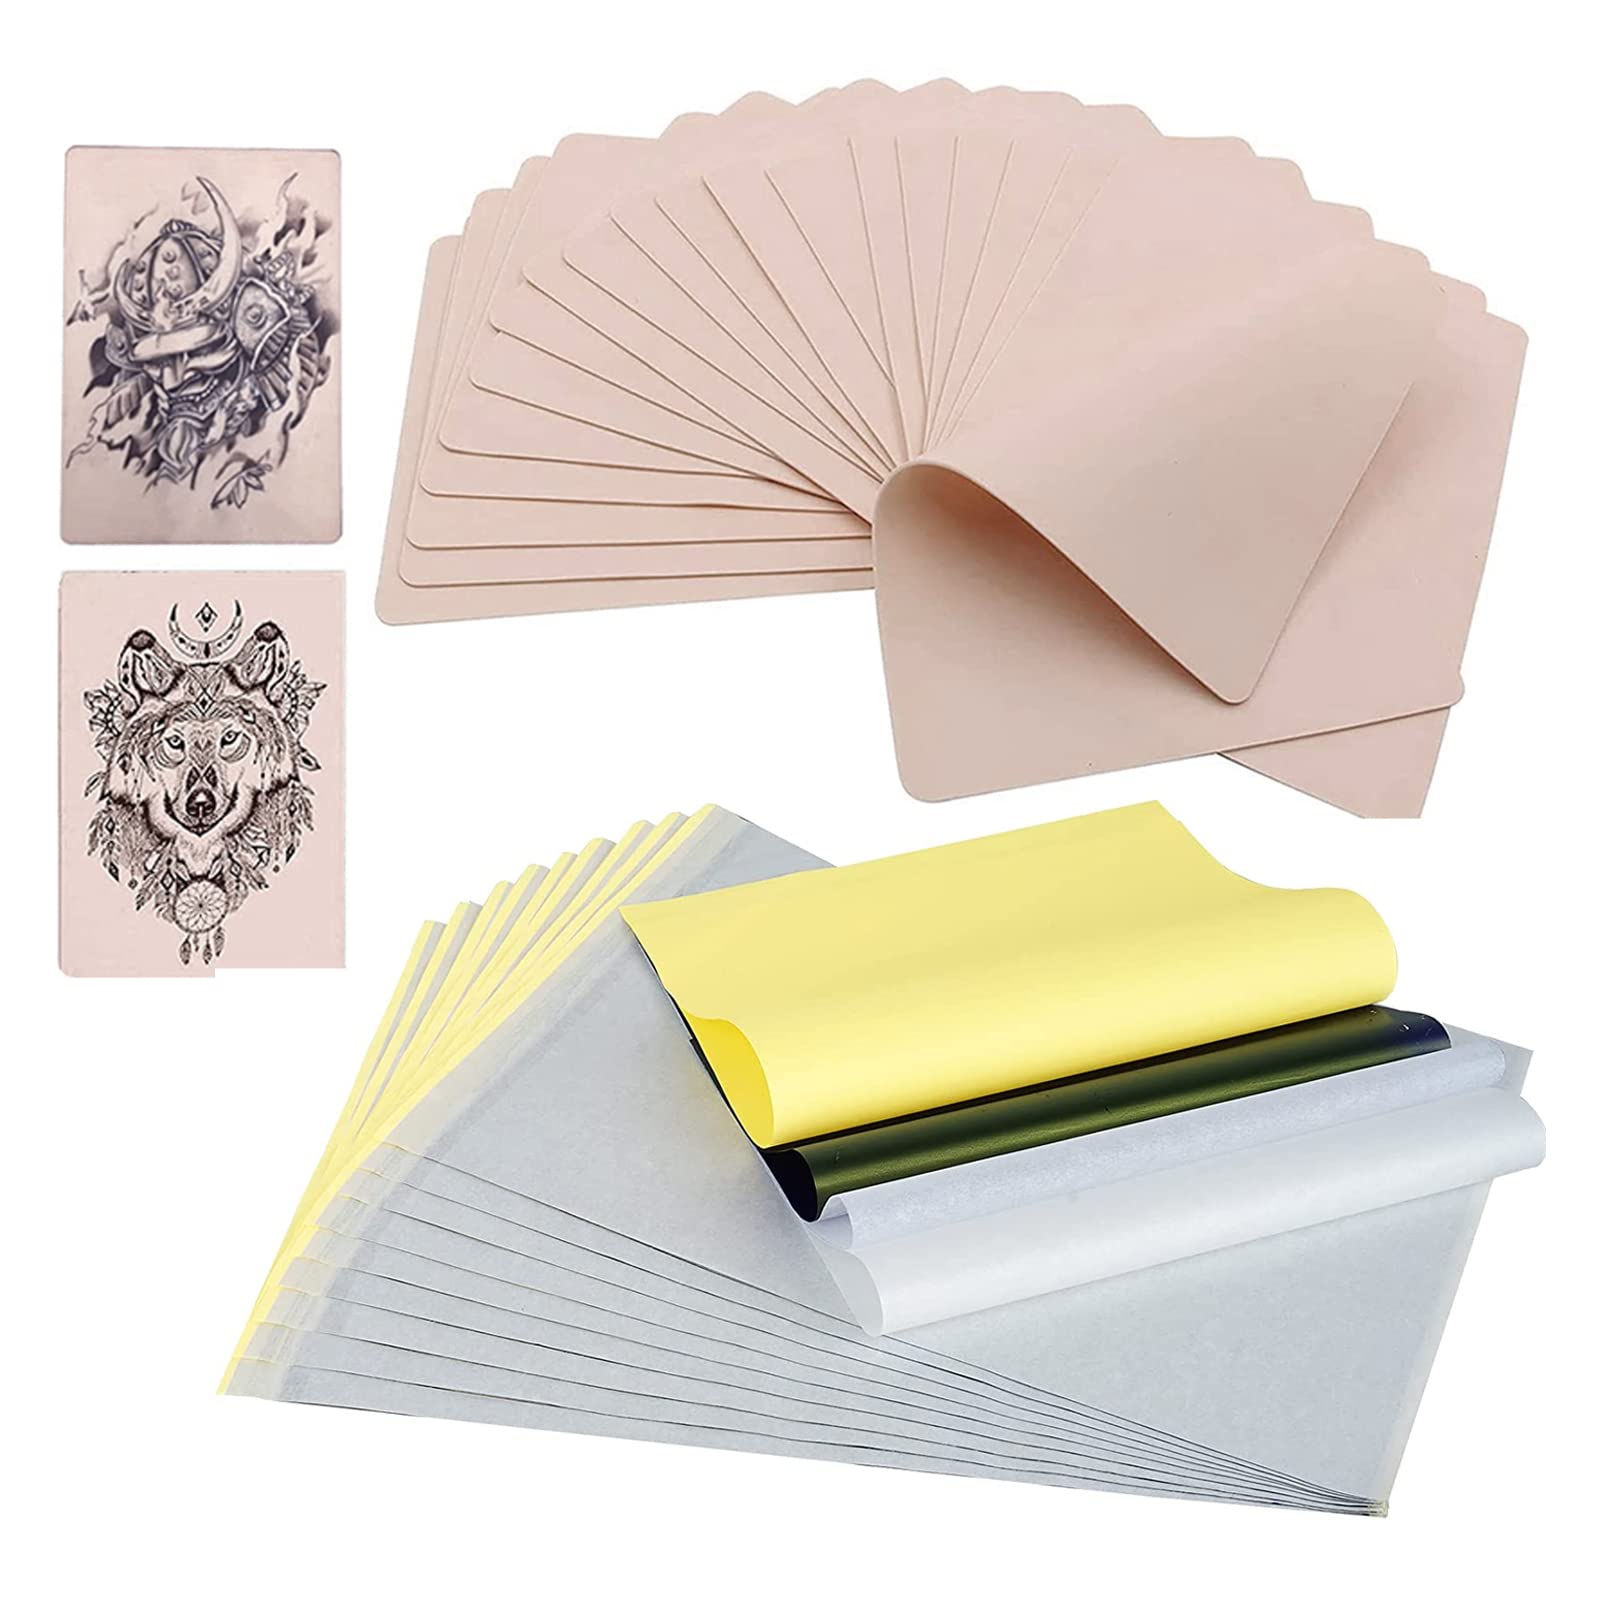 8Pcs Tattoo Practice Skins & 10Pcs Tattoo Transfer Papers, modacraft  5.7x7.6 Double Sides 1mm Thick Soft Silicone Thin Fake Skin Tattooing  Practice